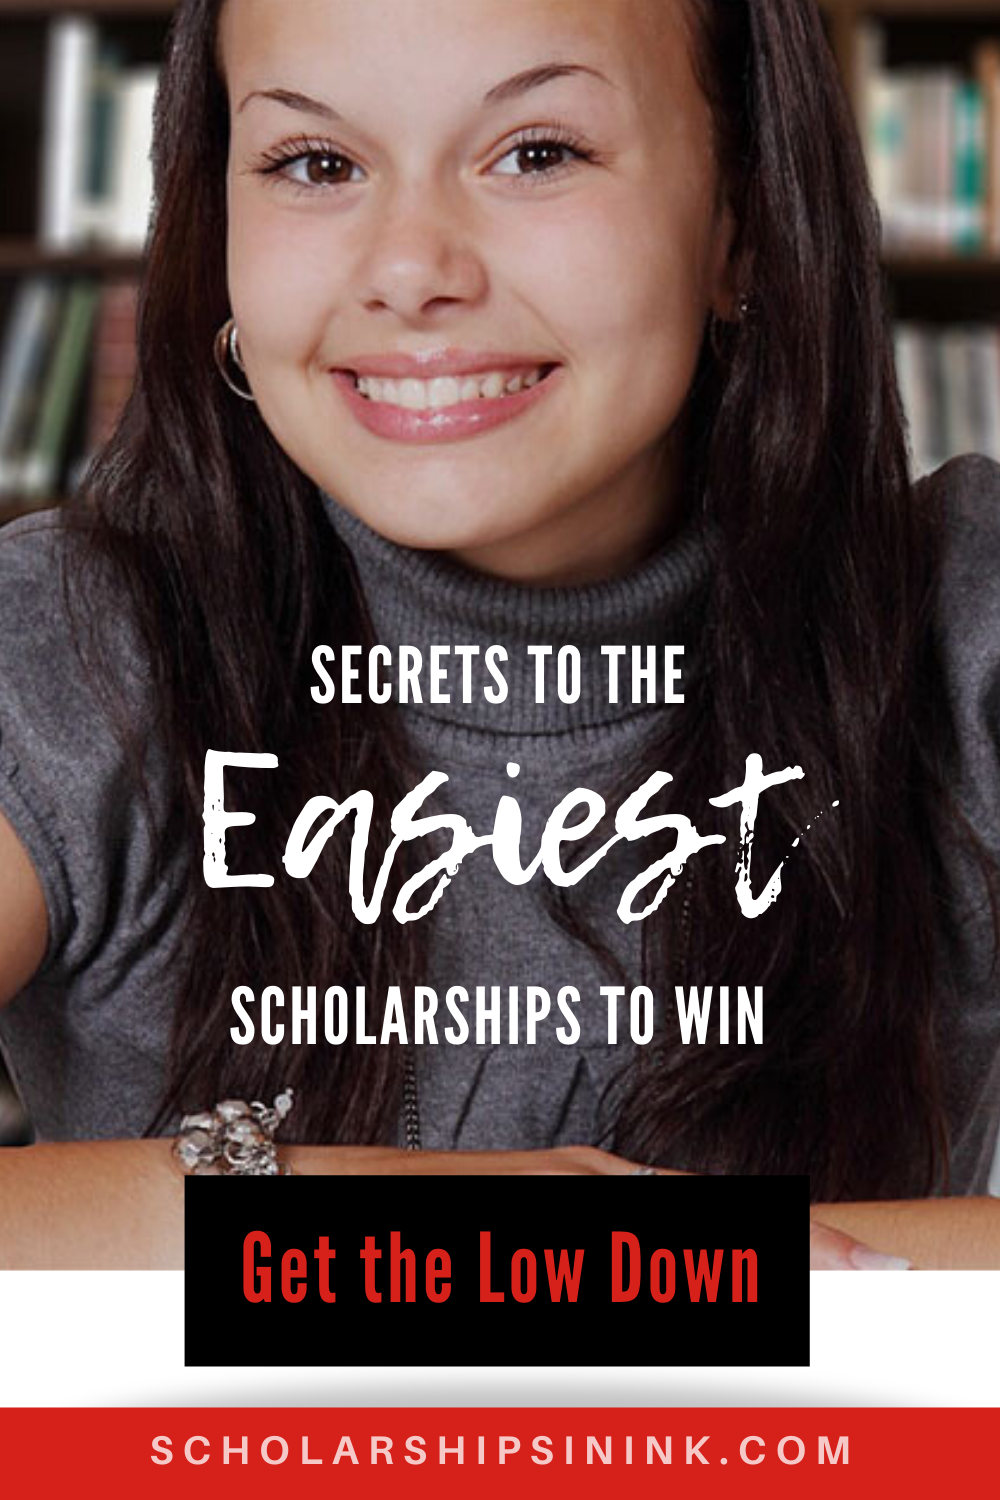 Secrets to the Easiest Scholarships to Win